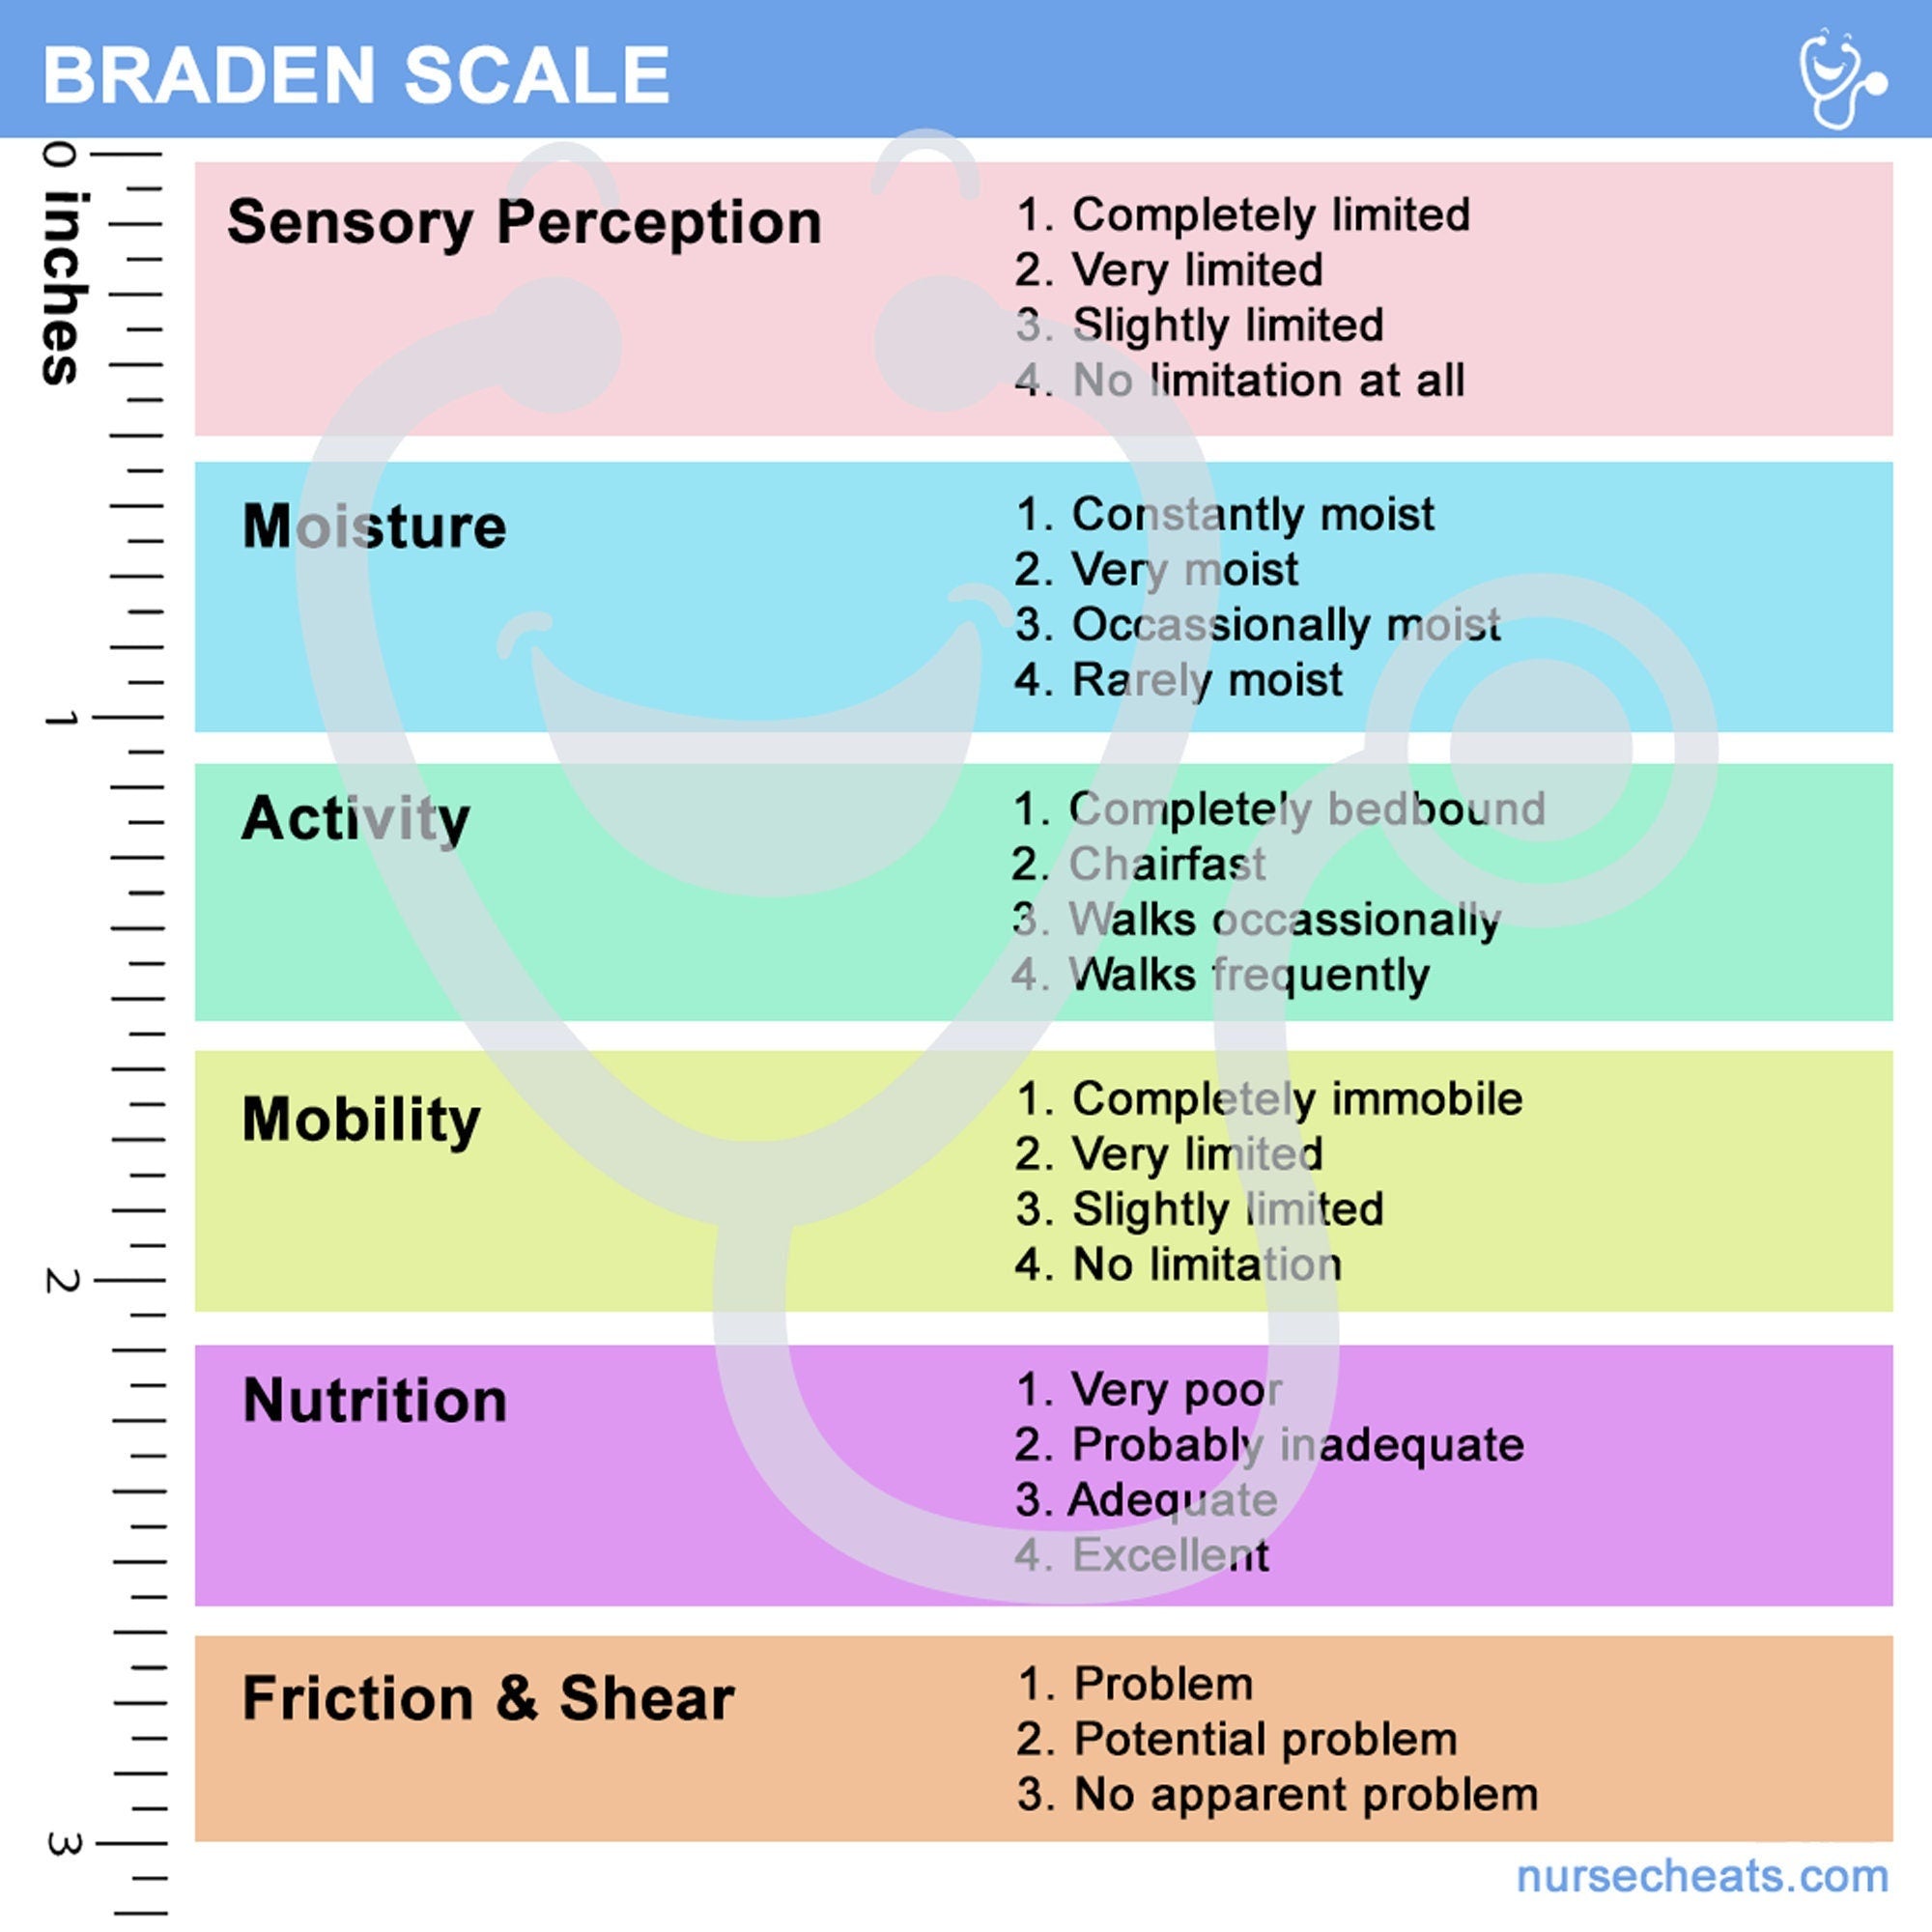 Side one of our Wound Care badge buddy contains the Braden scale which is useful in measuring risk for pressure wounds.